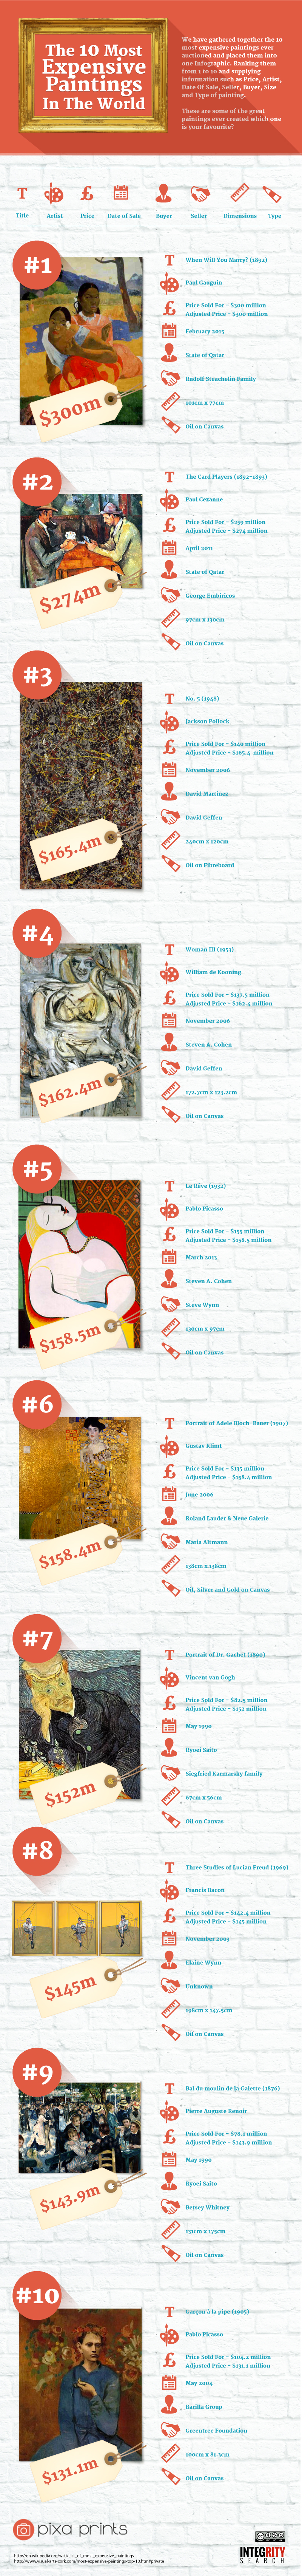 Pixa Prints Infographic: The 10 Most Expensive Paintings In The World